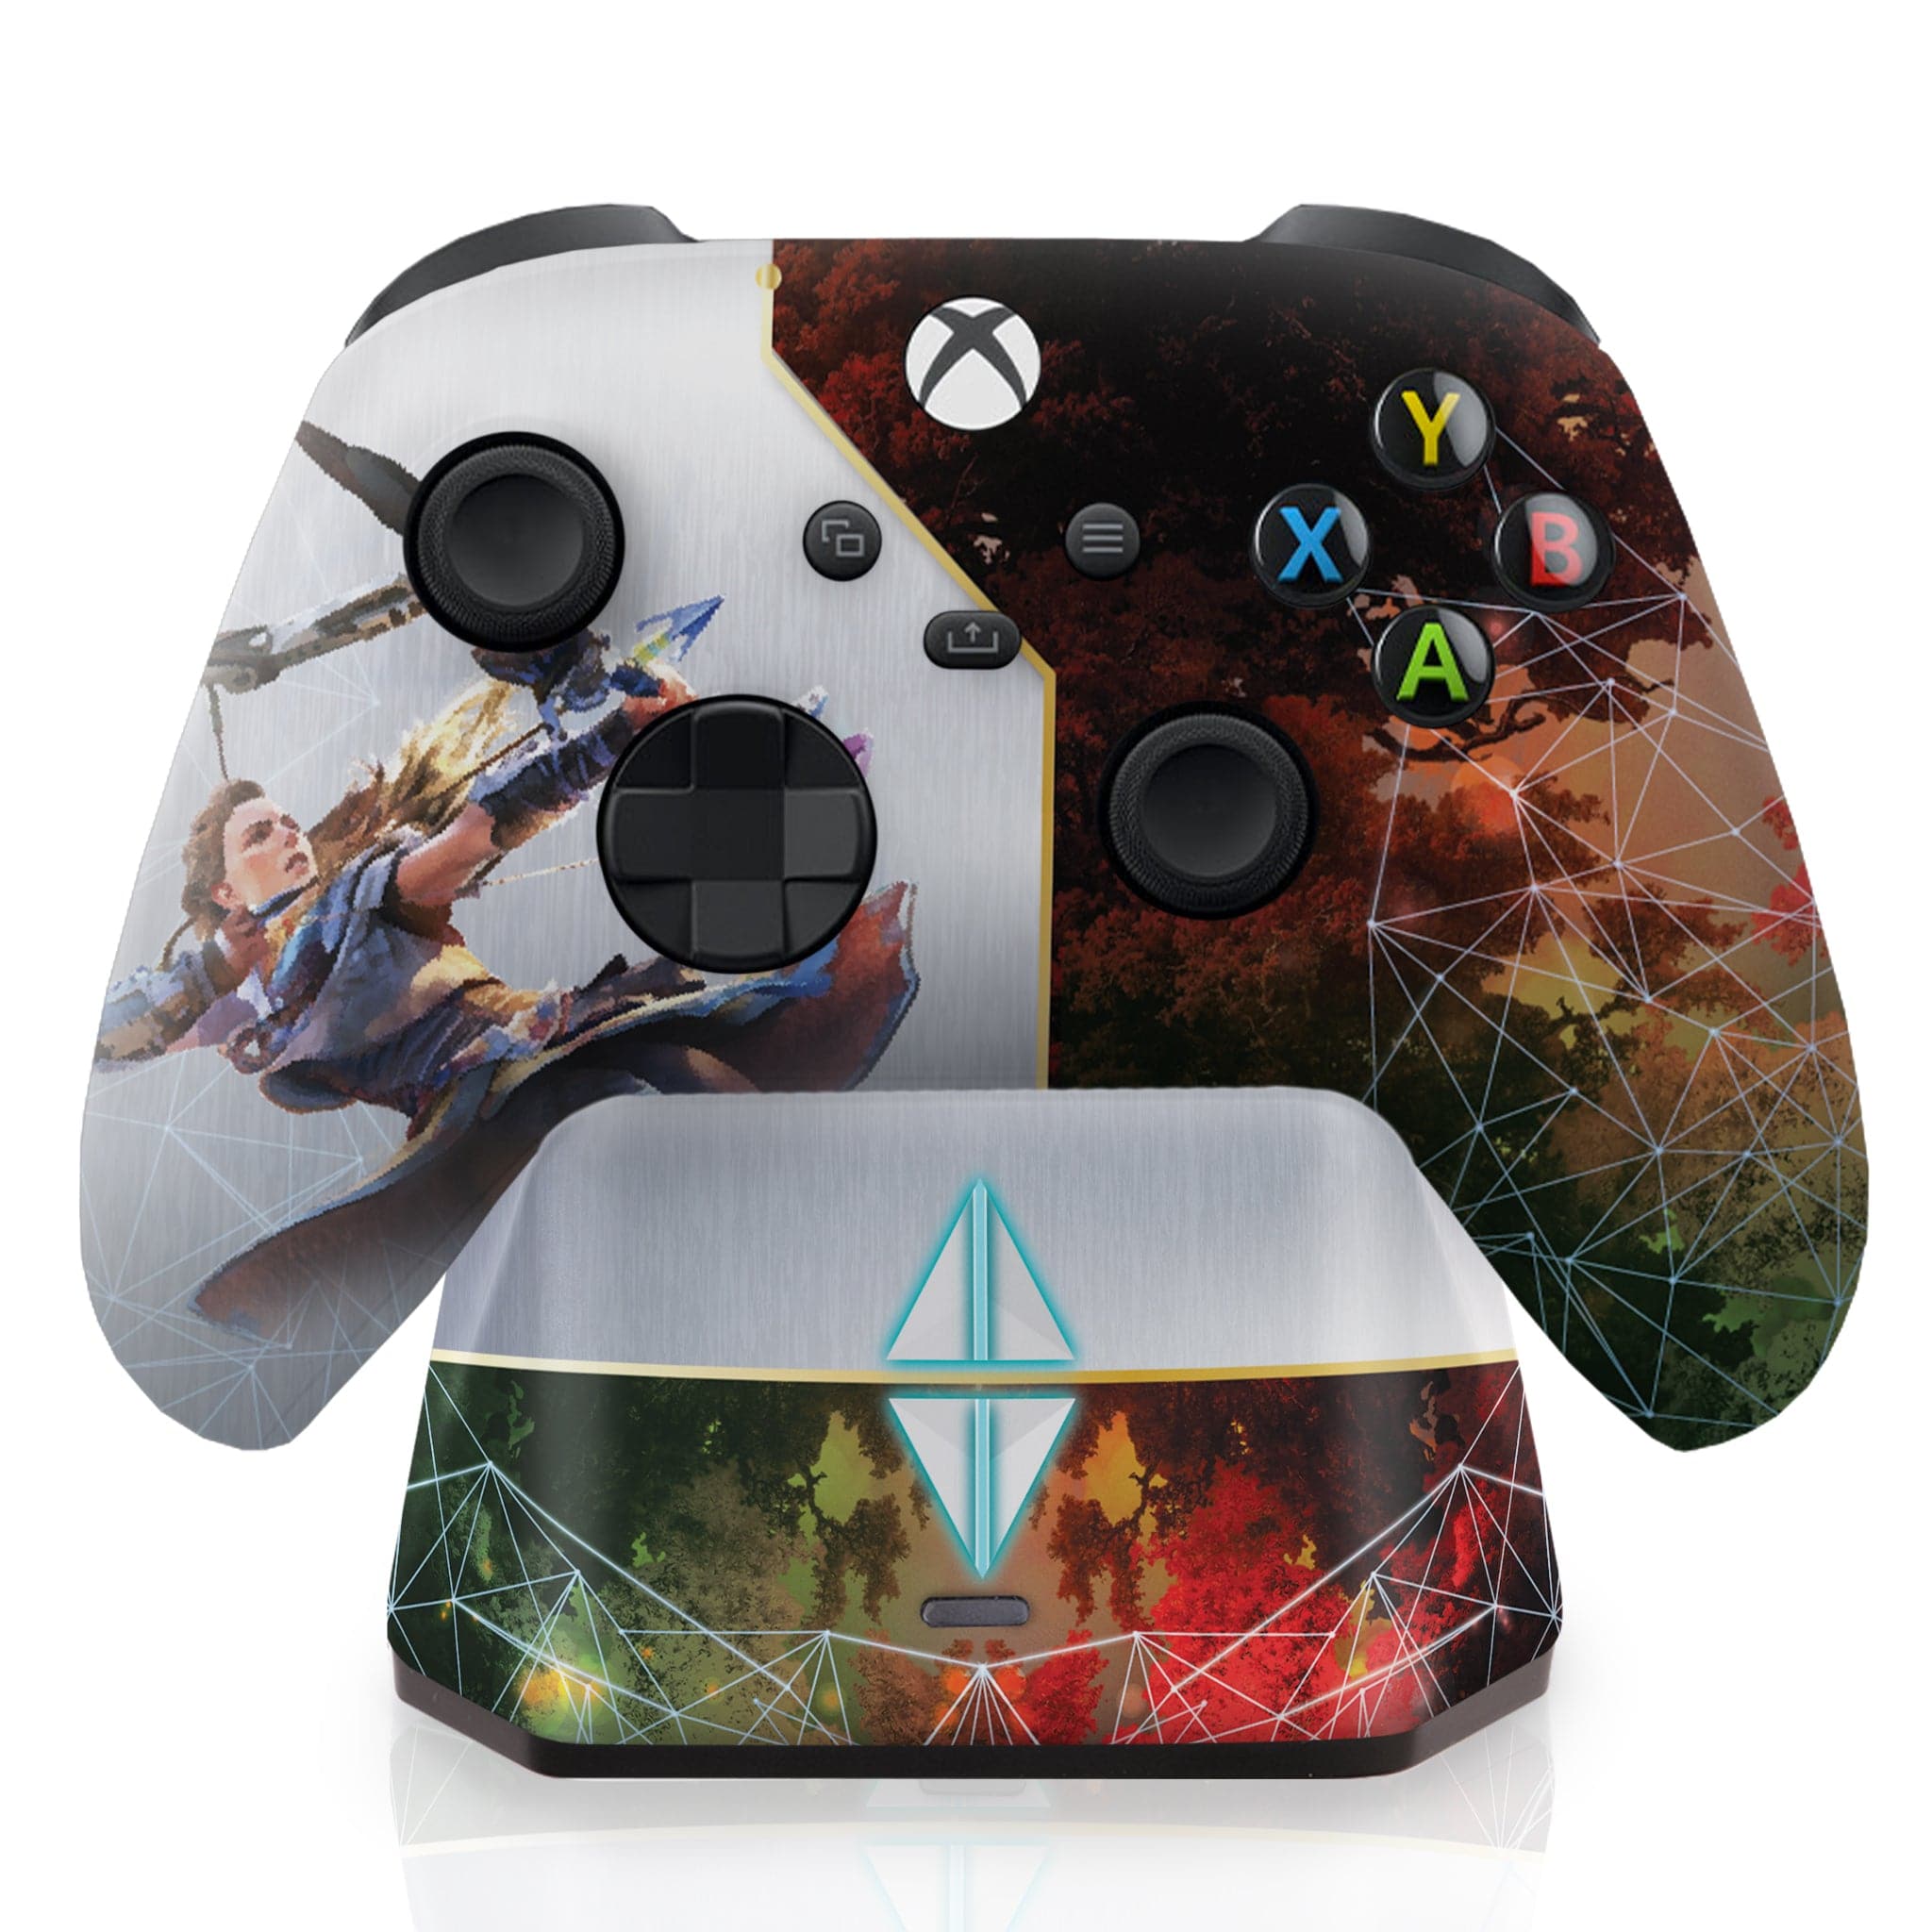 Horizon Forbidden West Xbox Series X Controller with Charging Station